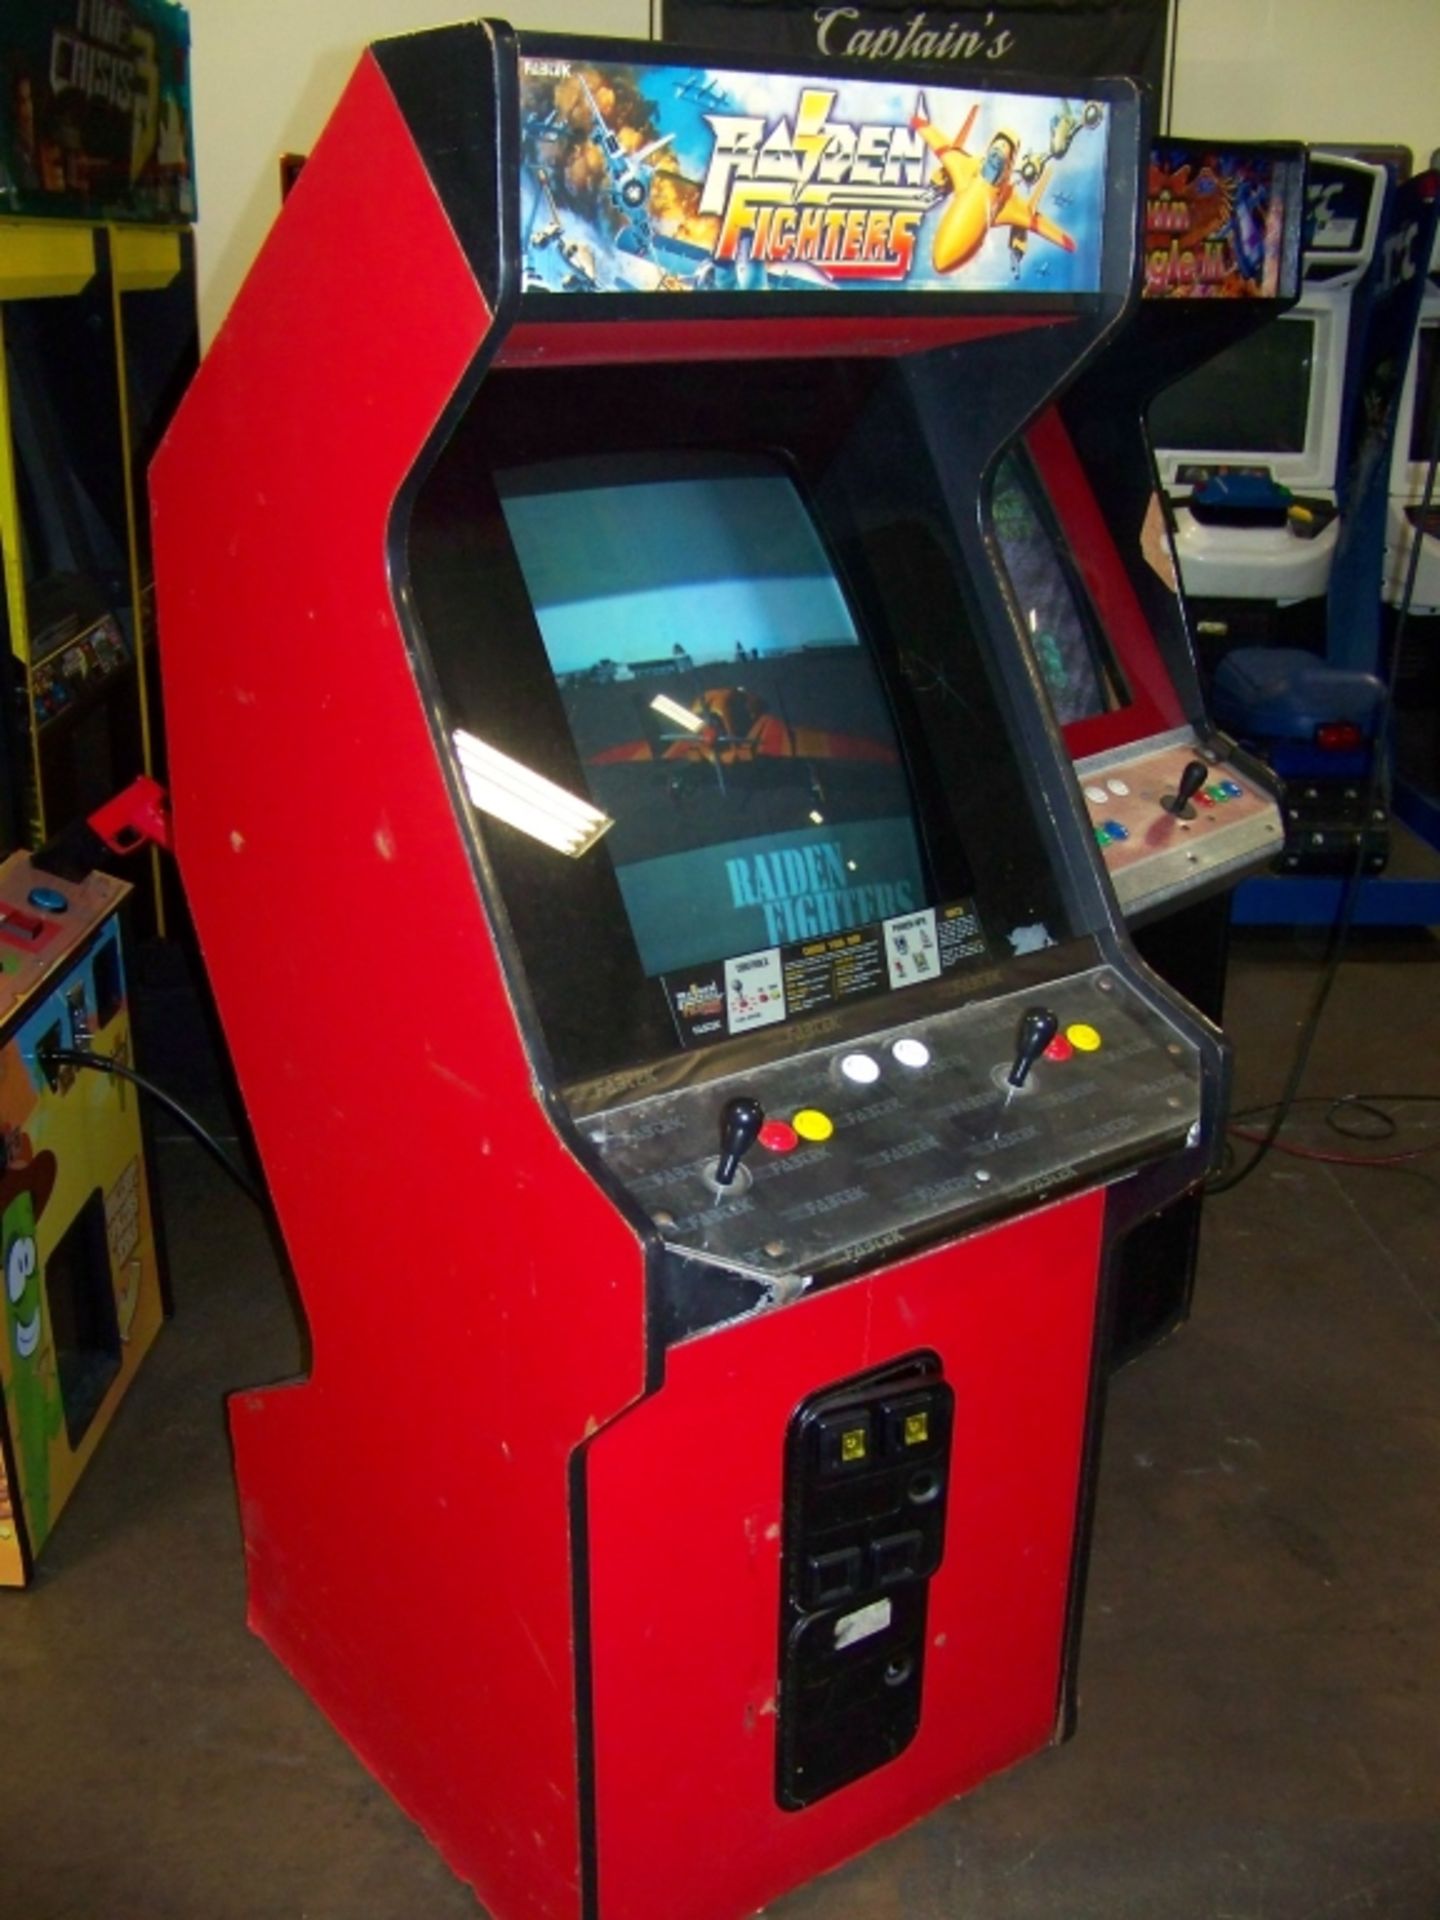 RAIDEN FIGHTERS ARCADE GAME - Image 3 of 3